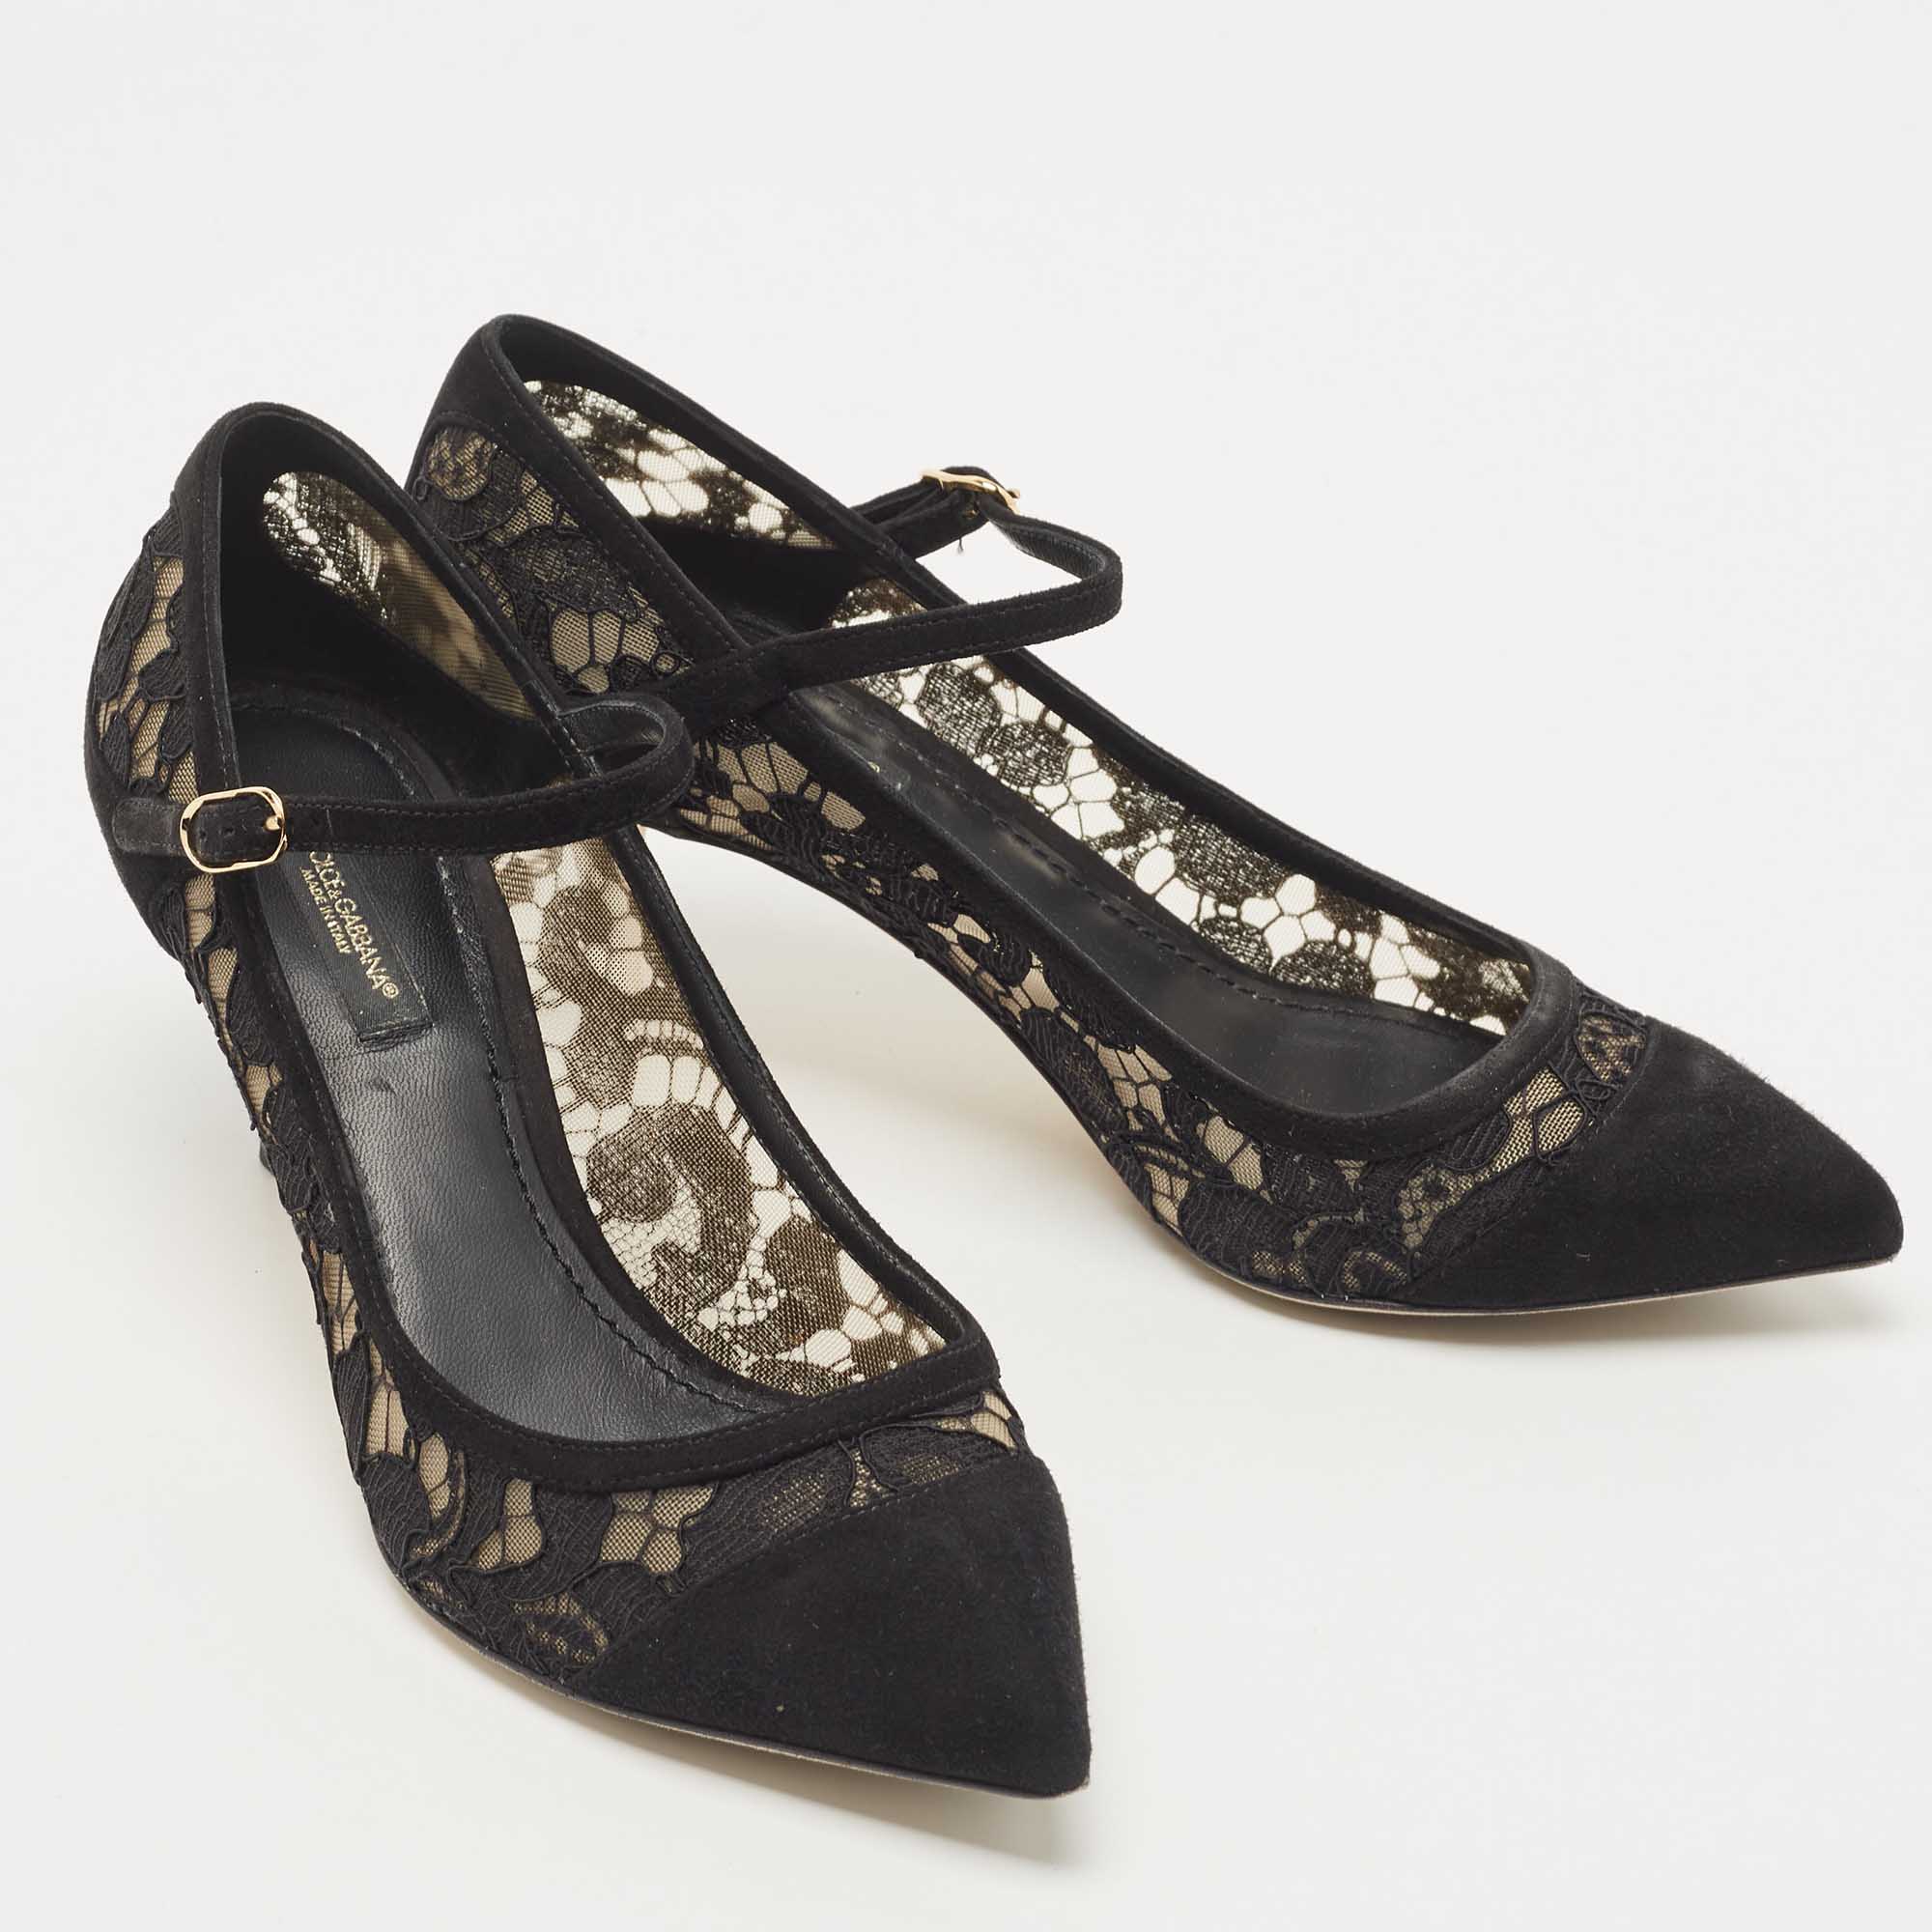 Dolce & Gabbana Black Lace And Suede Mary Jane Pumps Size 37.5